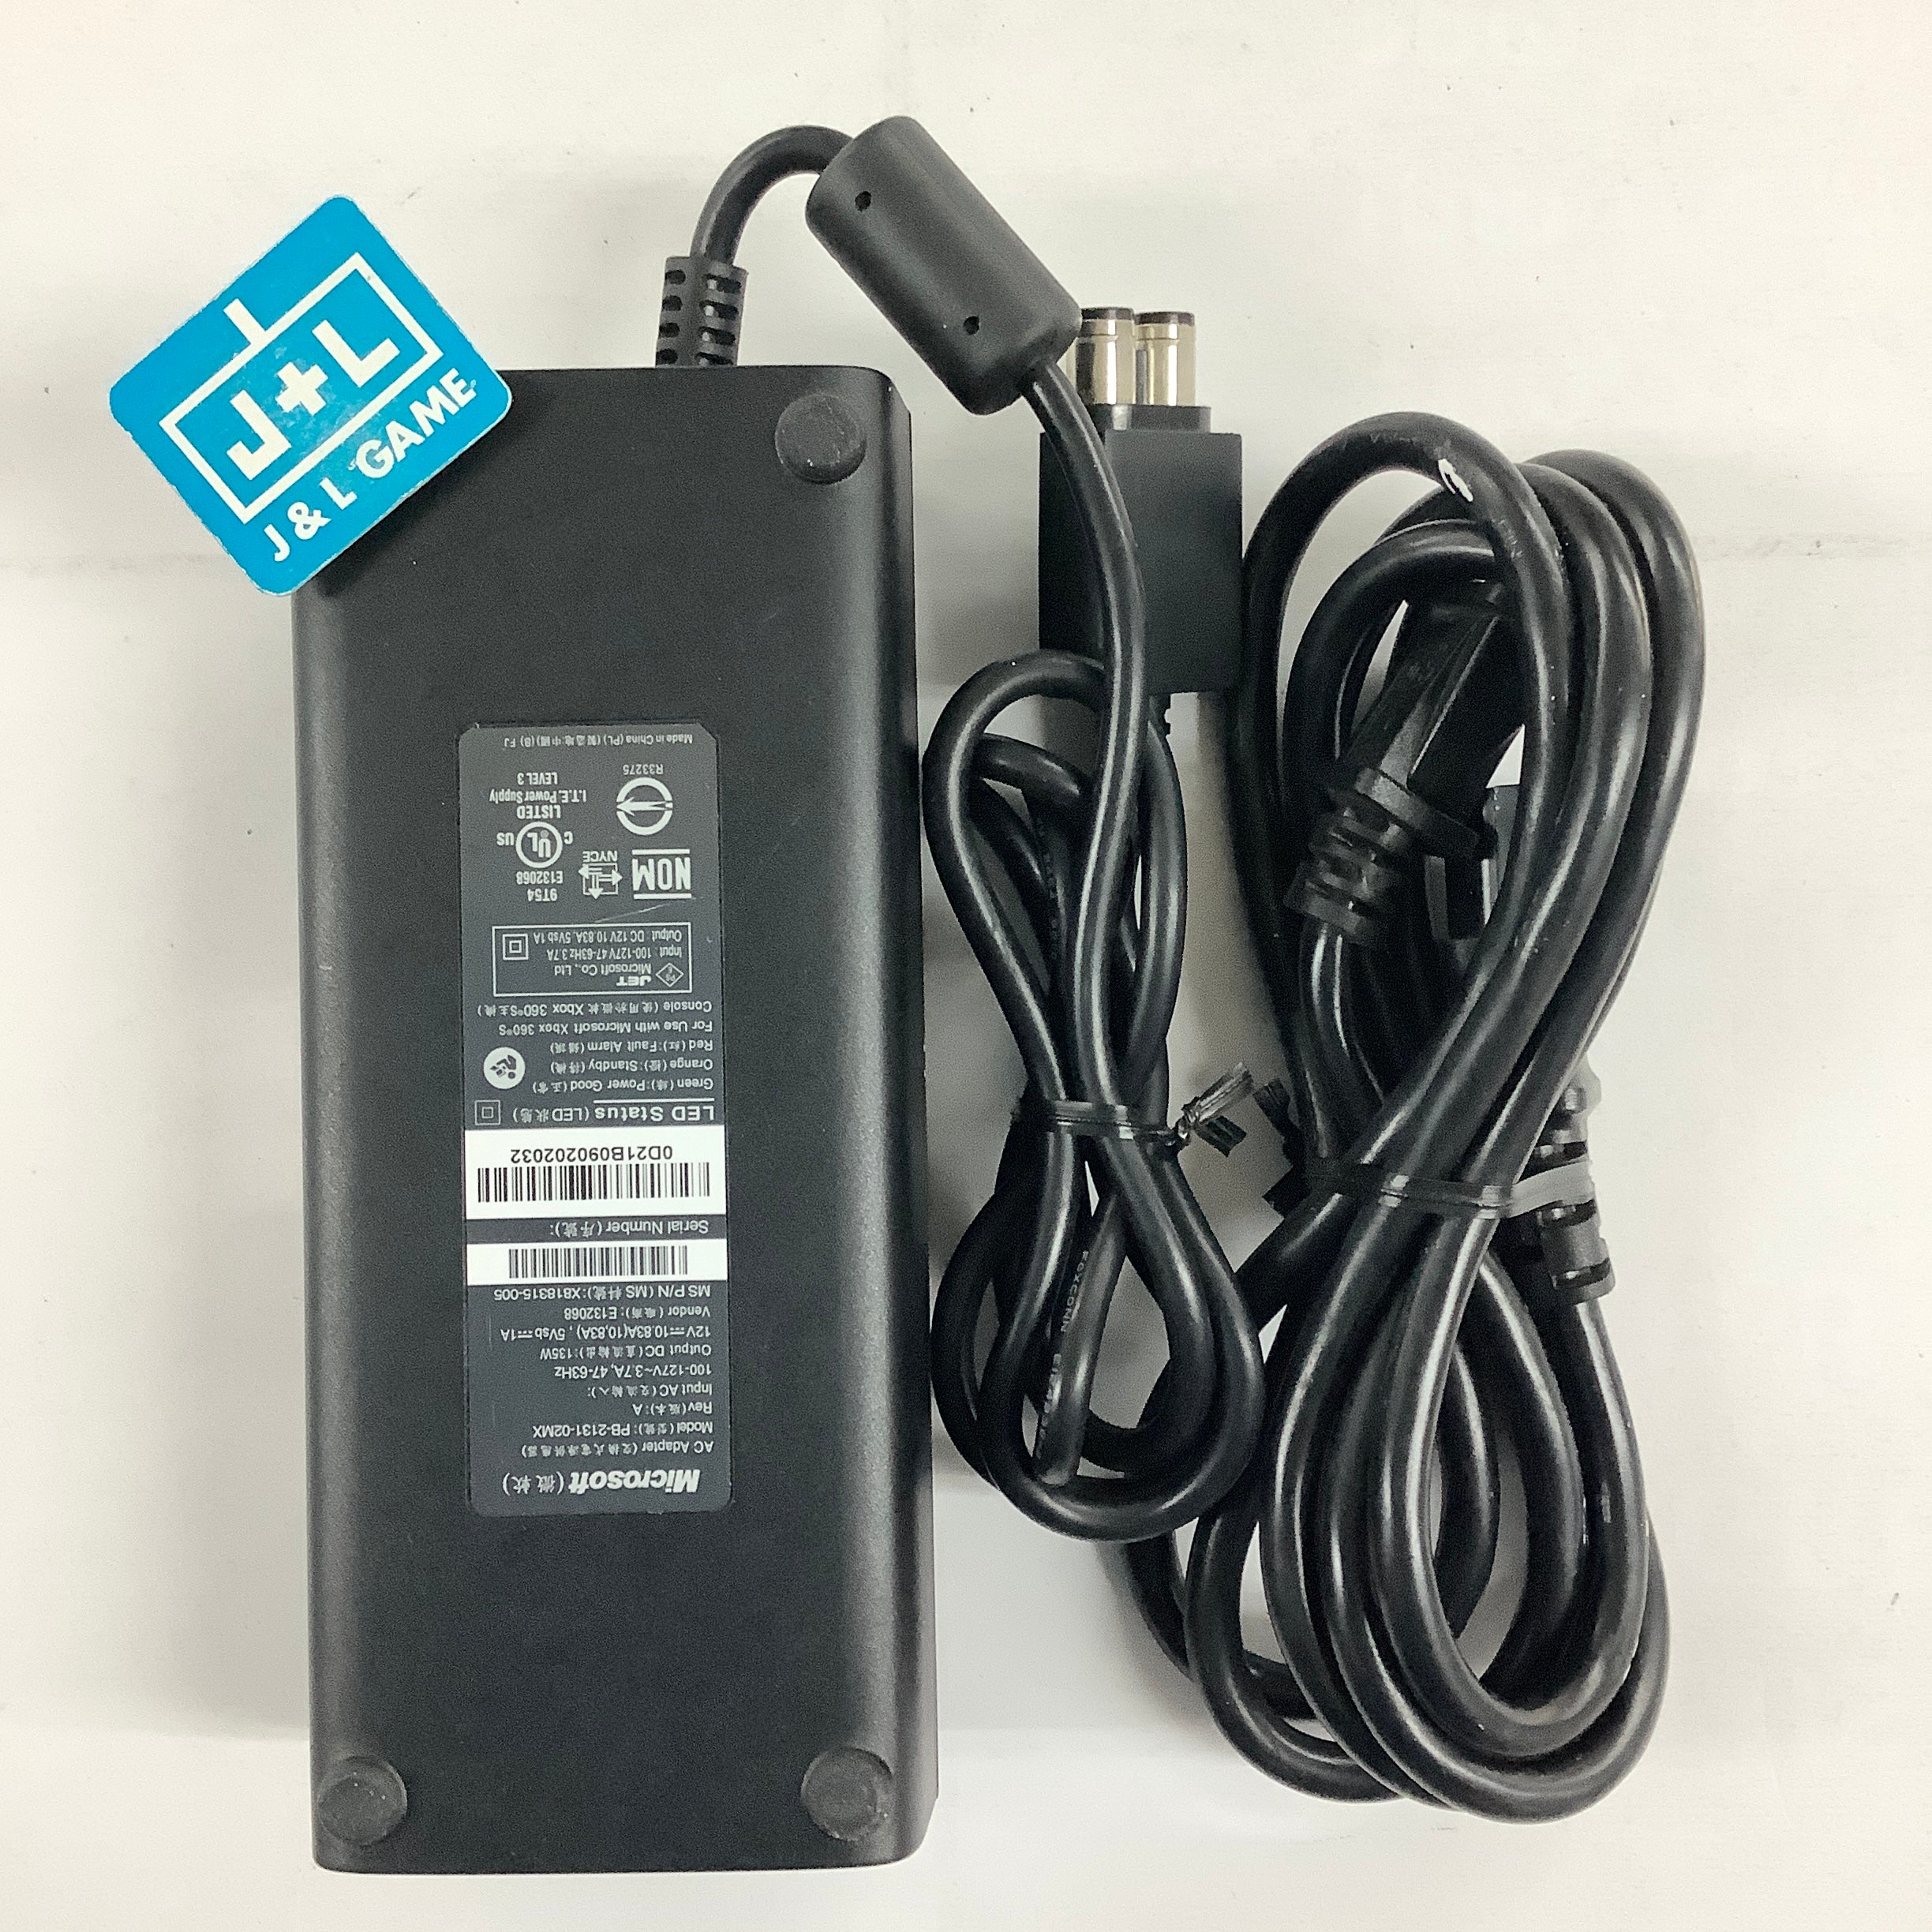 Microsoft Xbox 360 Slim Power Supply AC Adapter - Xbox 360 [Pre-Owned] Accessories Microsoft   